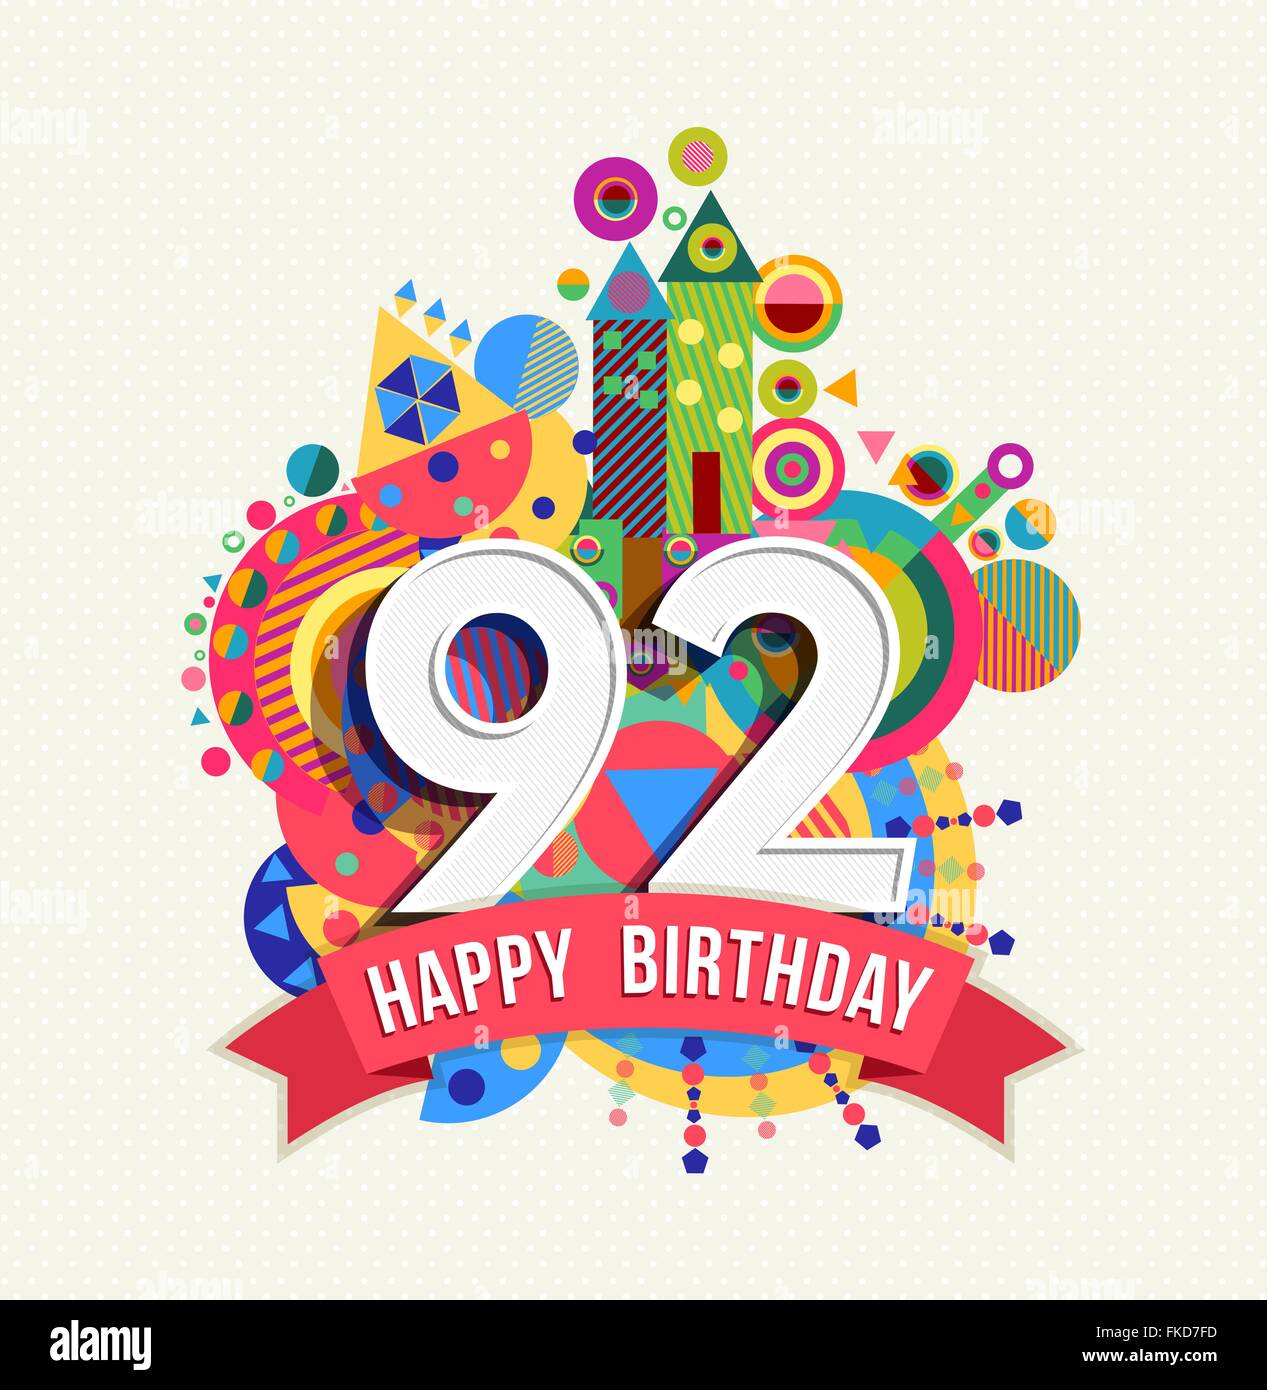 92nd-birthday-stock-vector-images-alamy